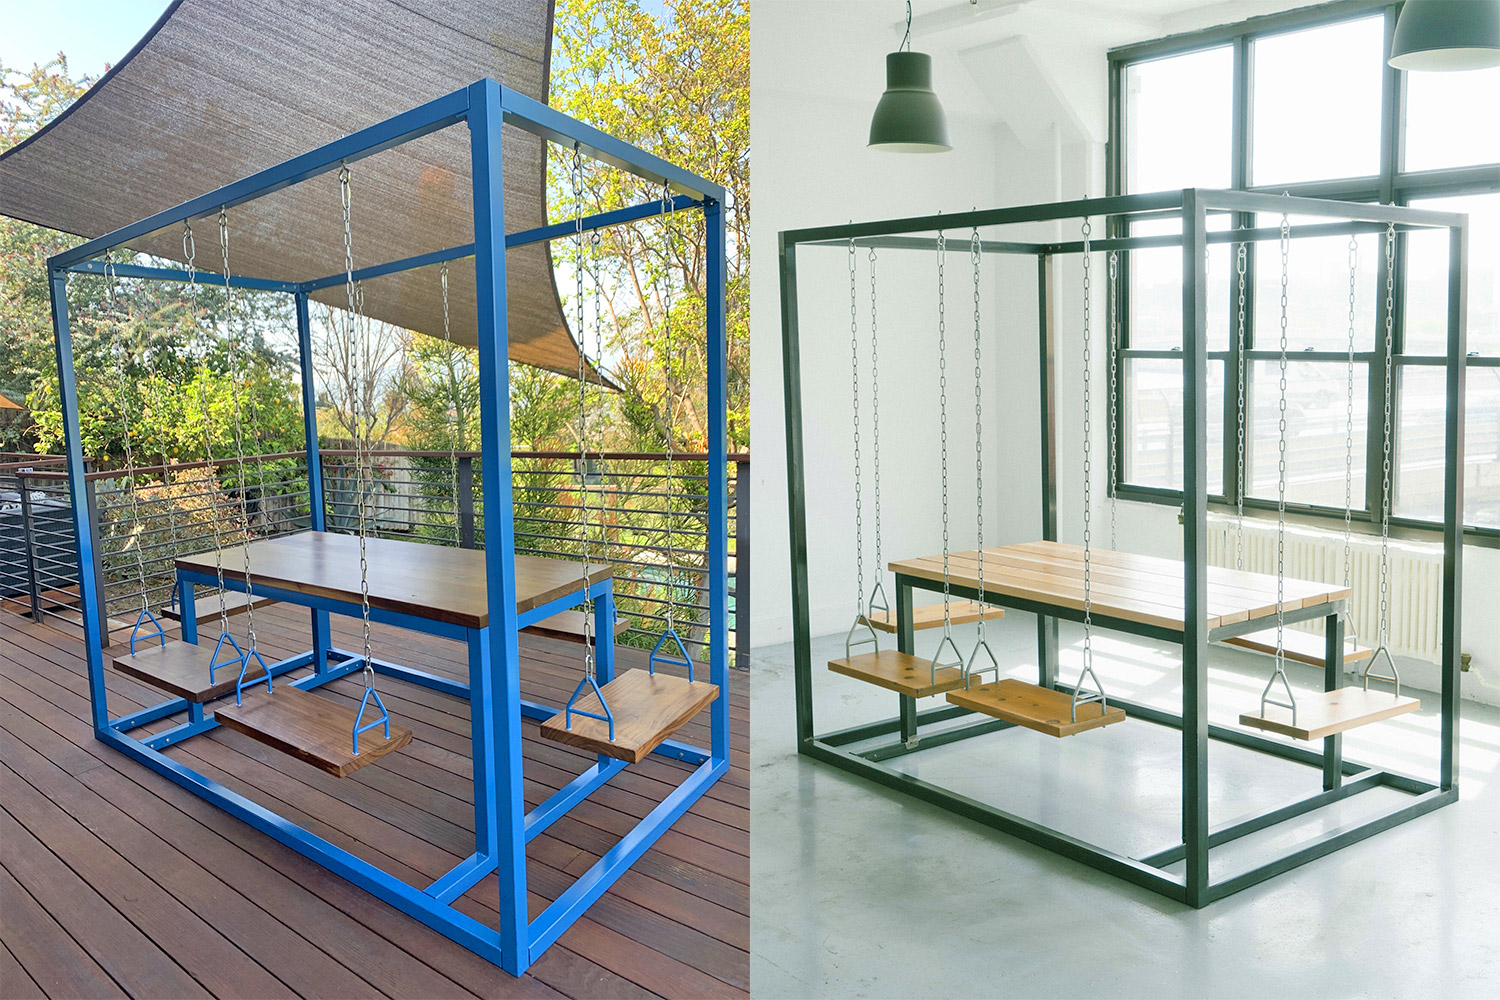 Swing Tables Let You Swing While You Eat or Have a Meeting